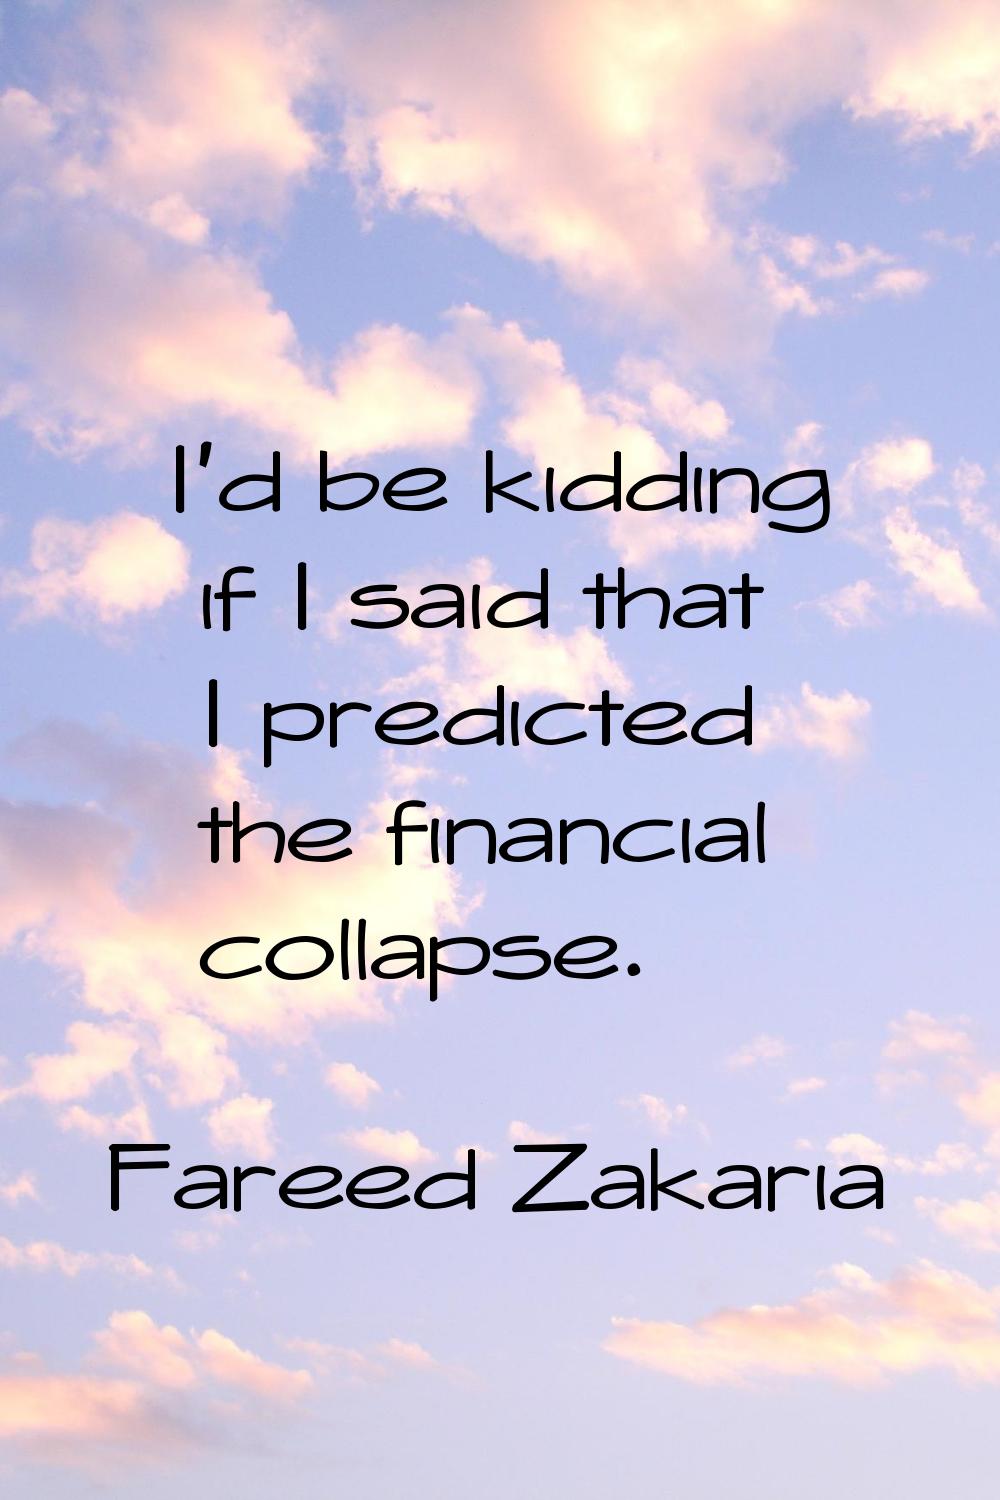 I'd be kidding if I said that I predicted the financial collapse.